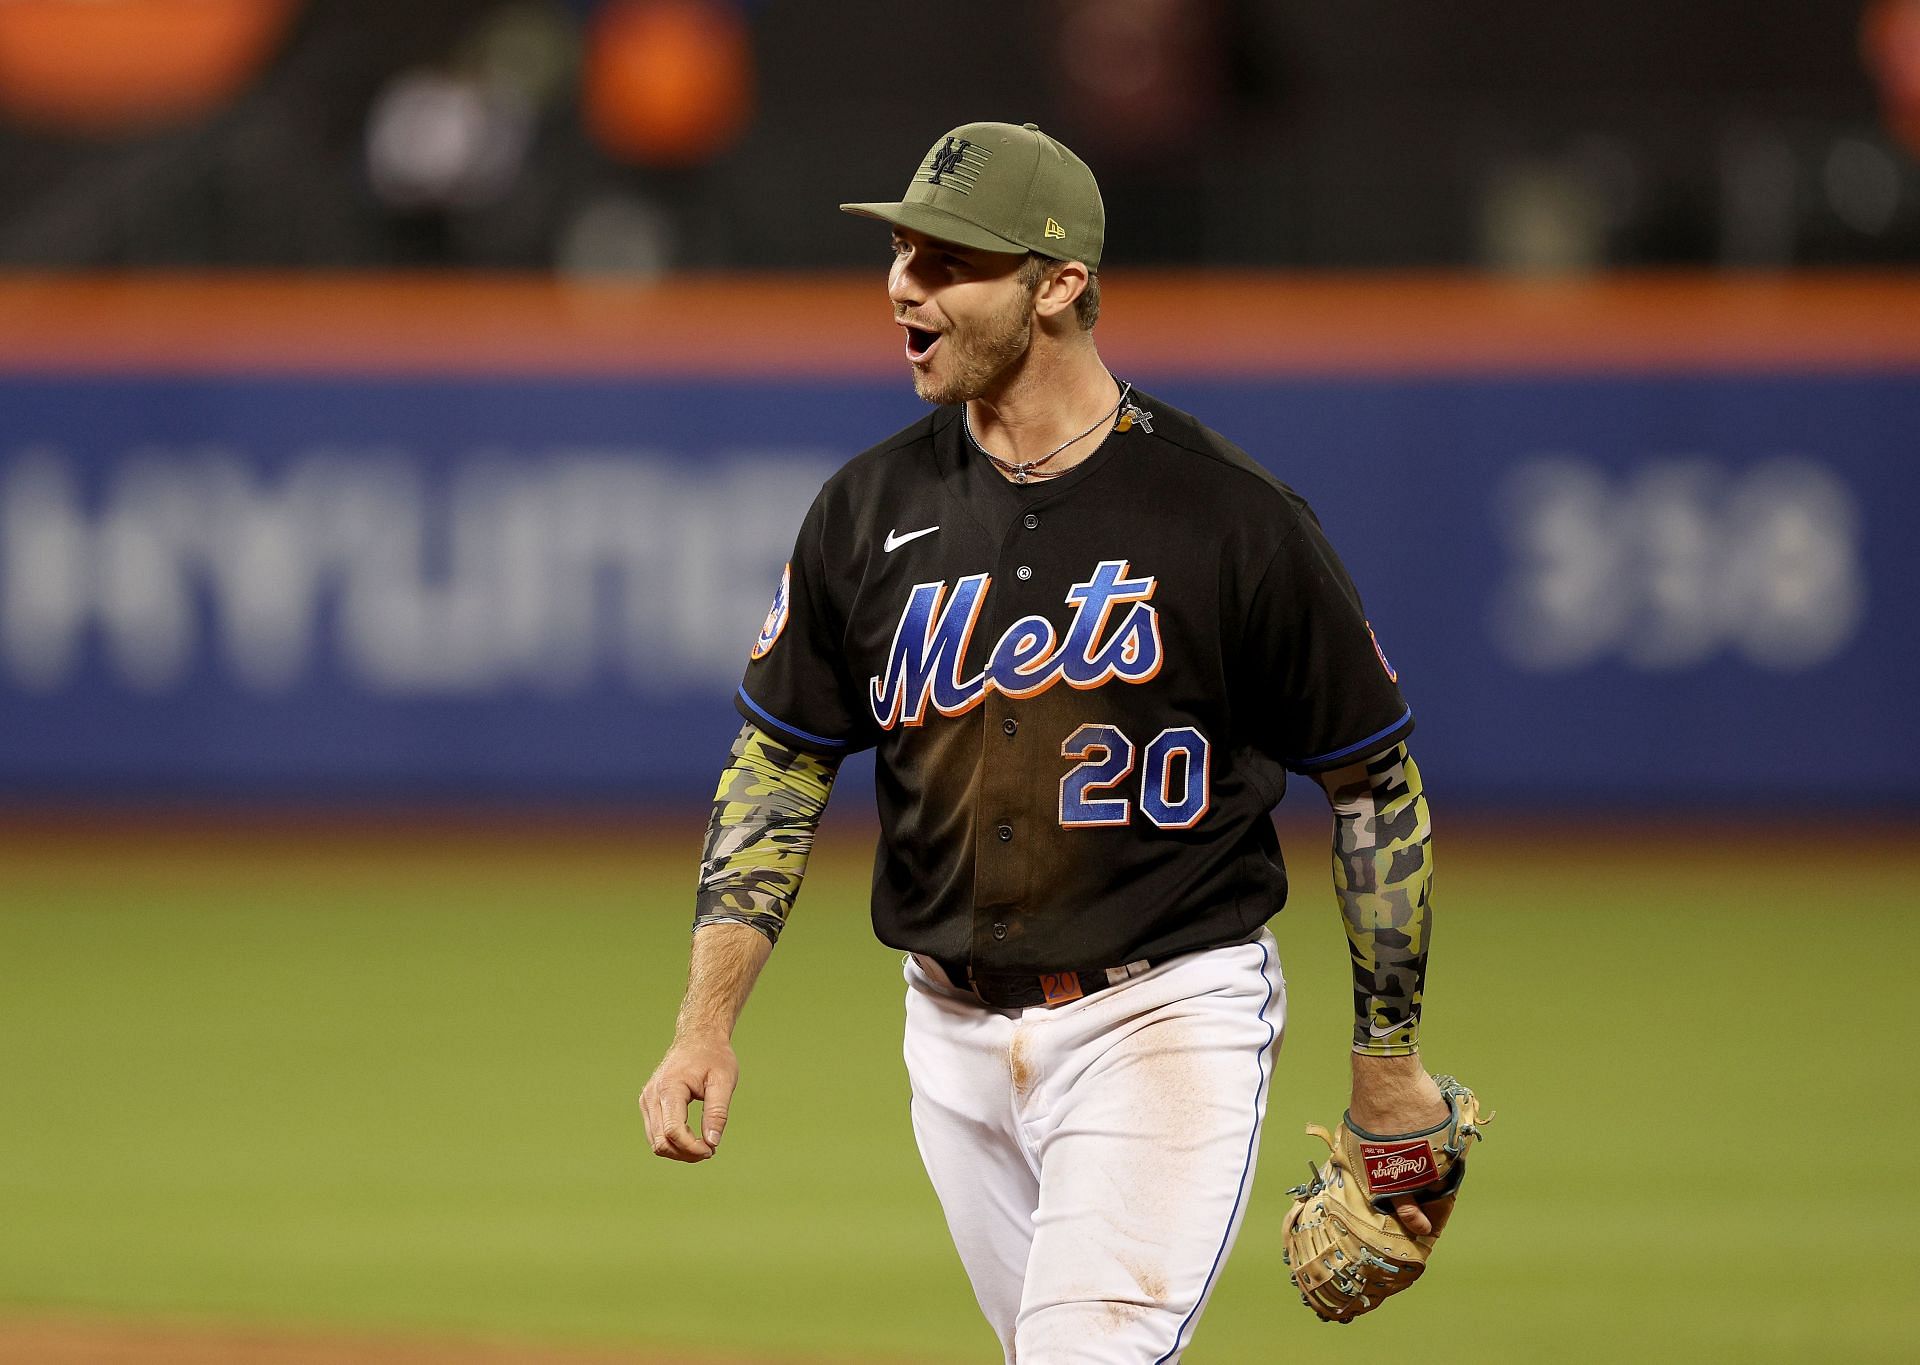 Mets: Pete Alonso's urge to poop led to a home run for New York